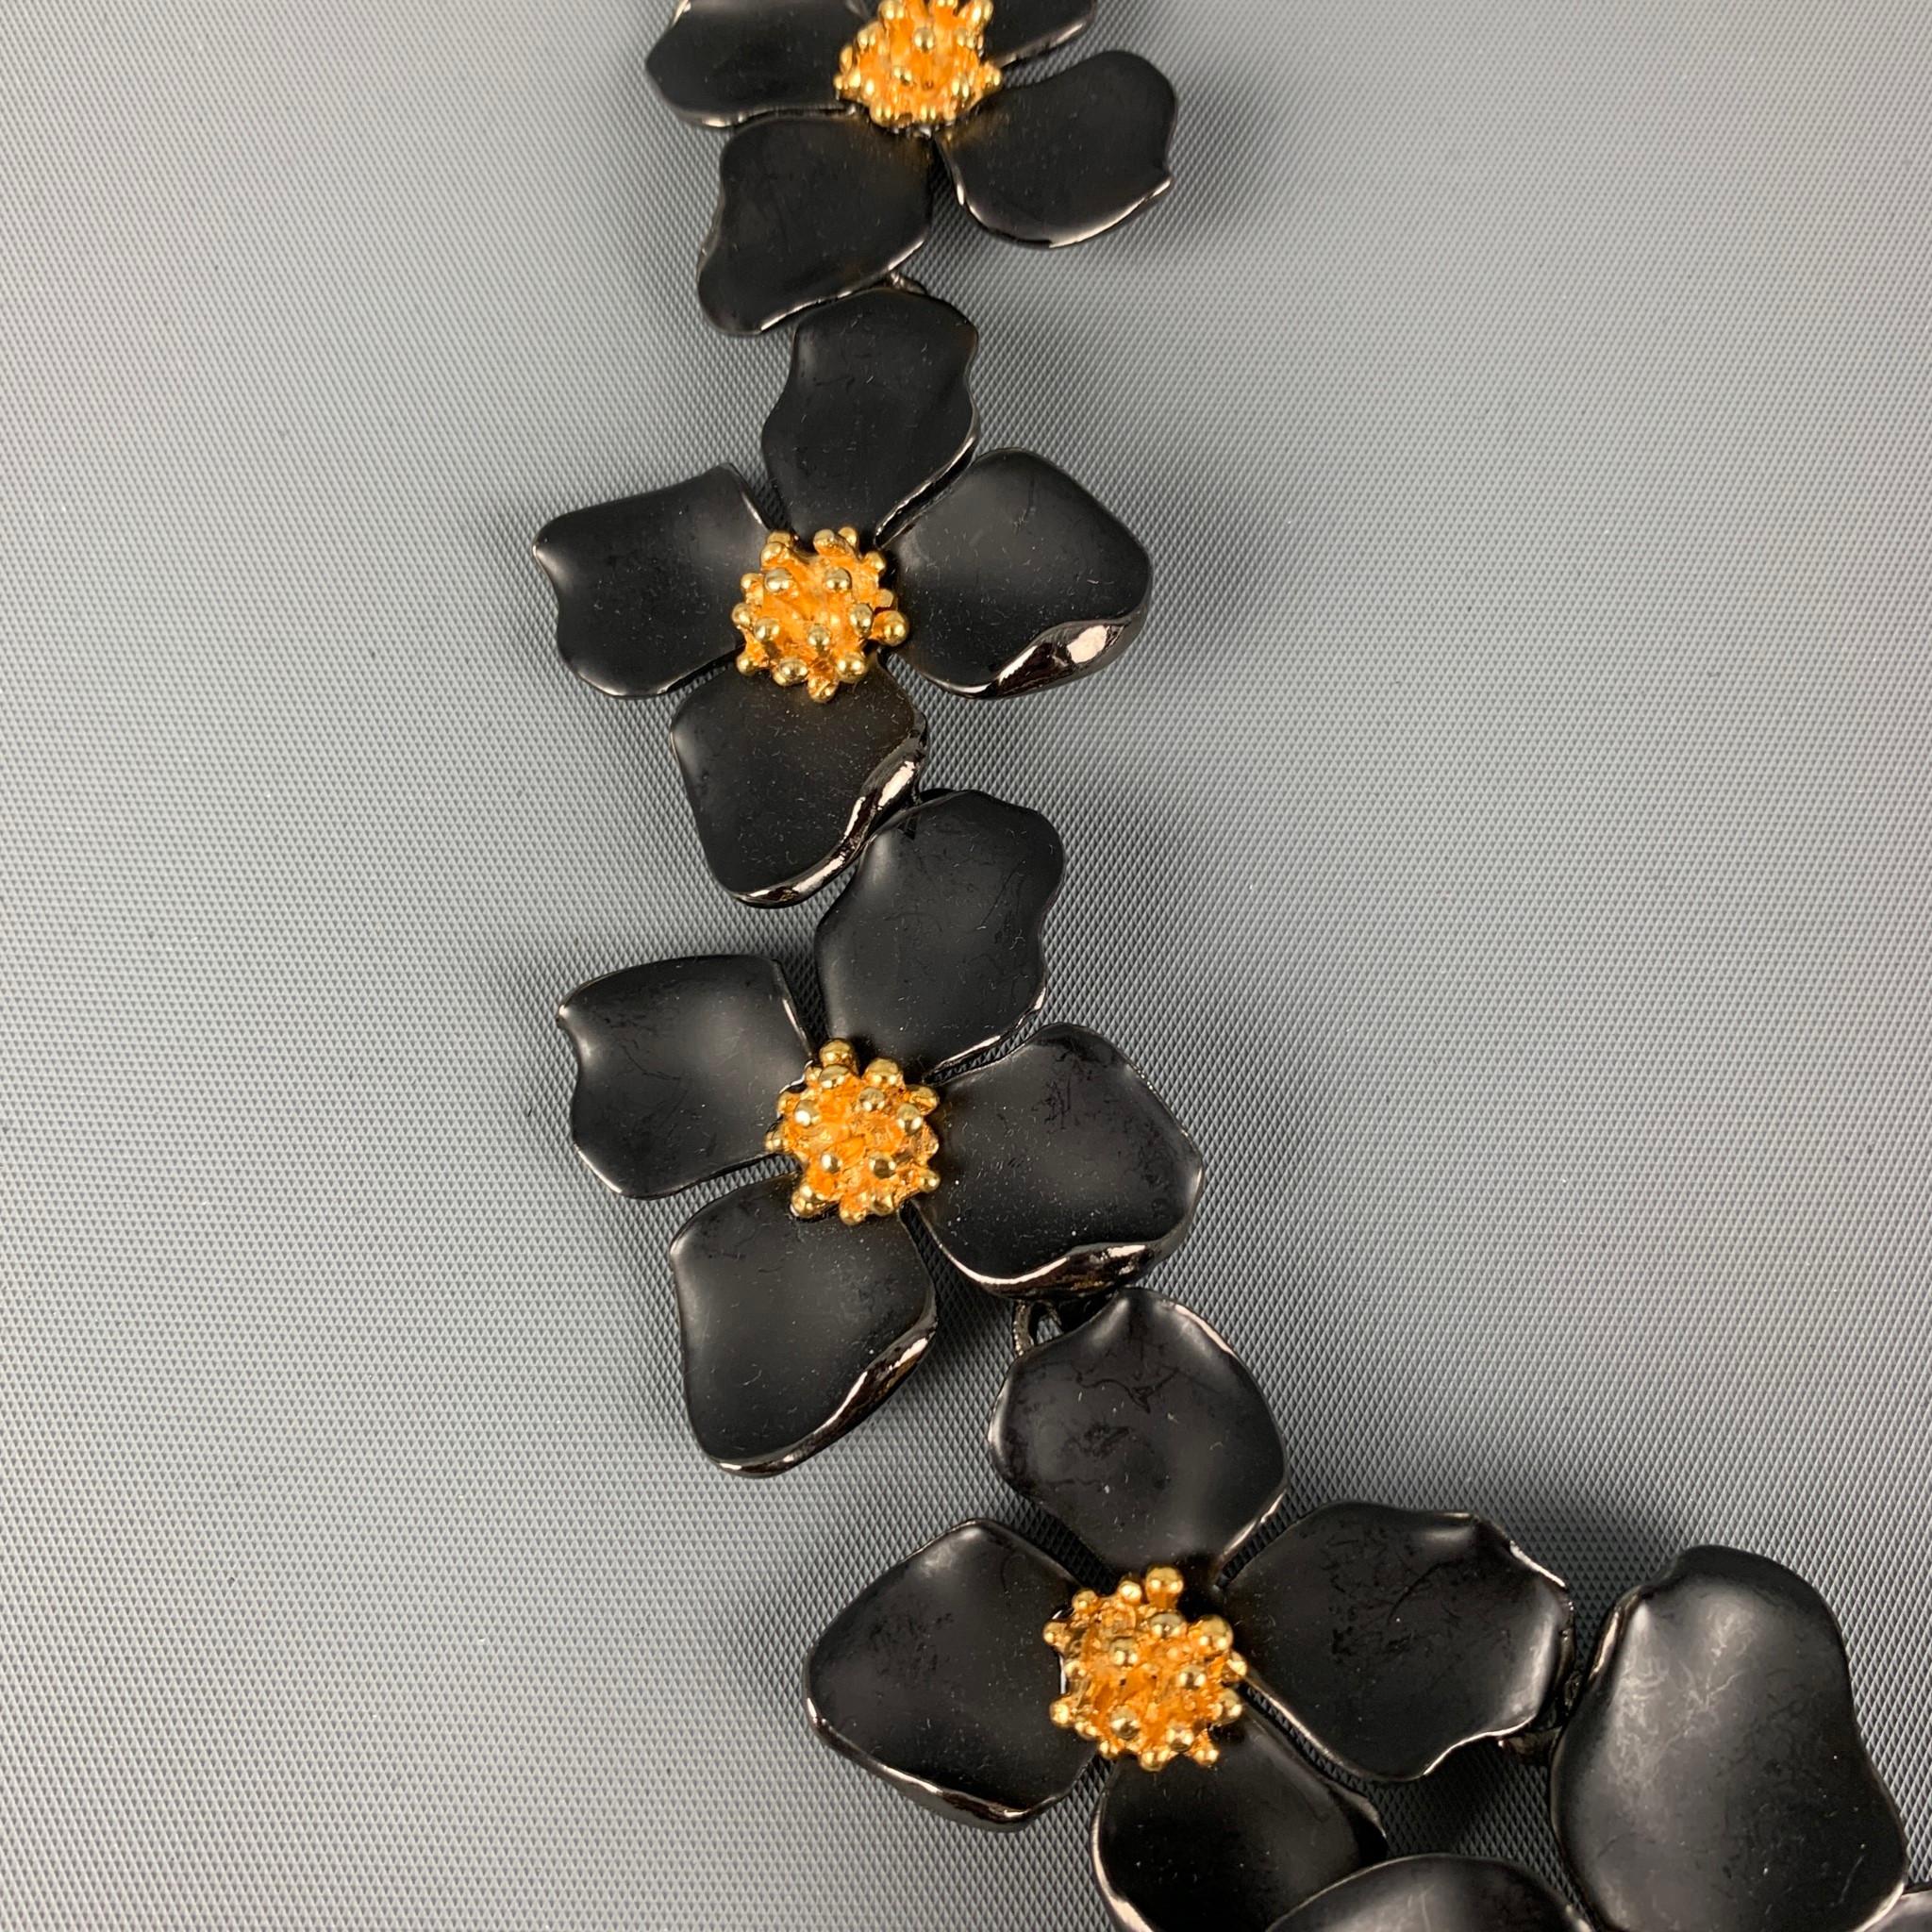 OSCAR DE LA RENTA necklace comes in a black & gold metal featuring a floral design and a clasp closure. Includes dust bag and tags. 

Excellent Pre-Owned Condition.
Original Retail Price: $424.00

Measurements:

Length: 20.5 in. 